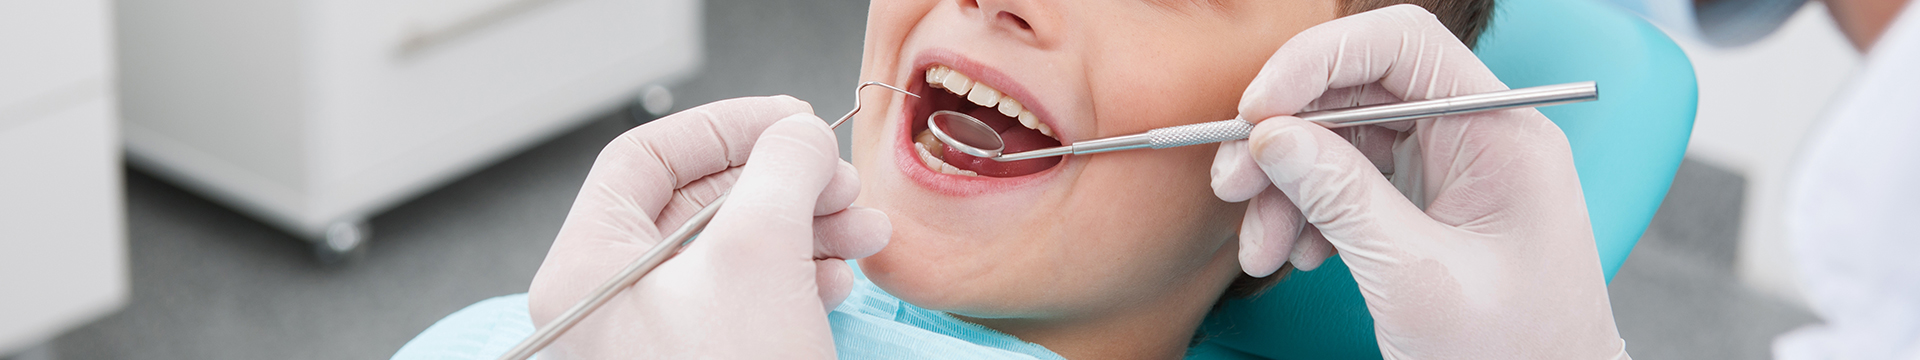 Cropped images of kid in dental chair smiling